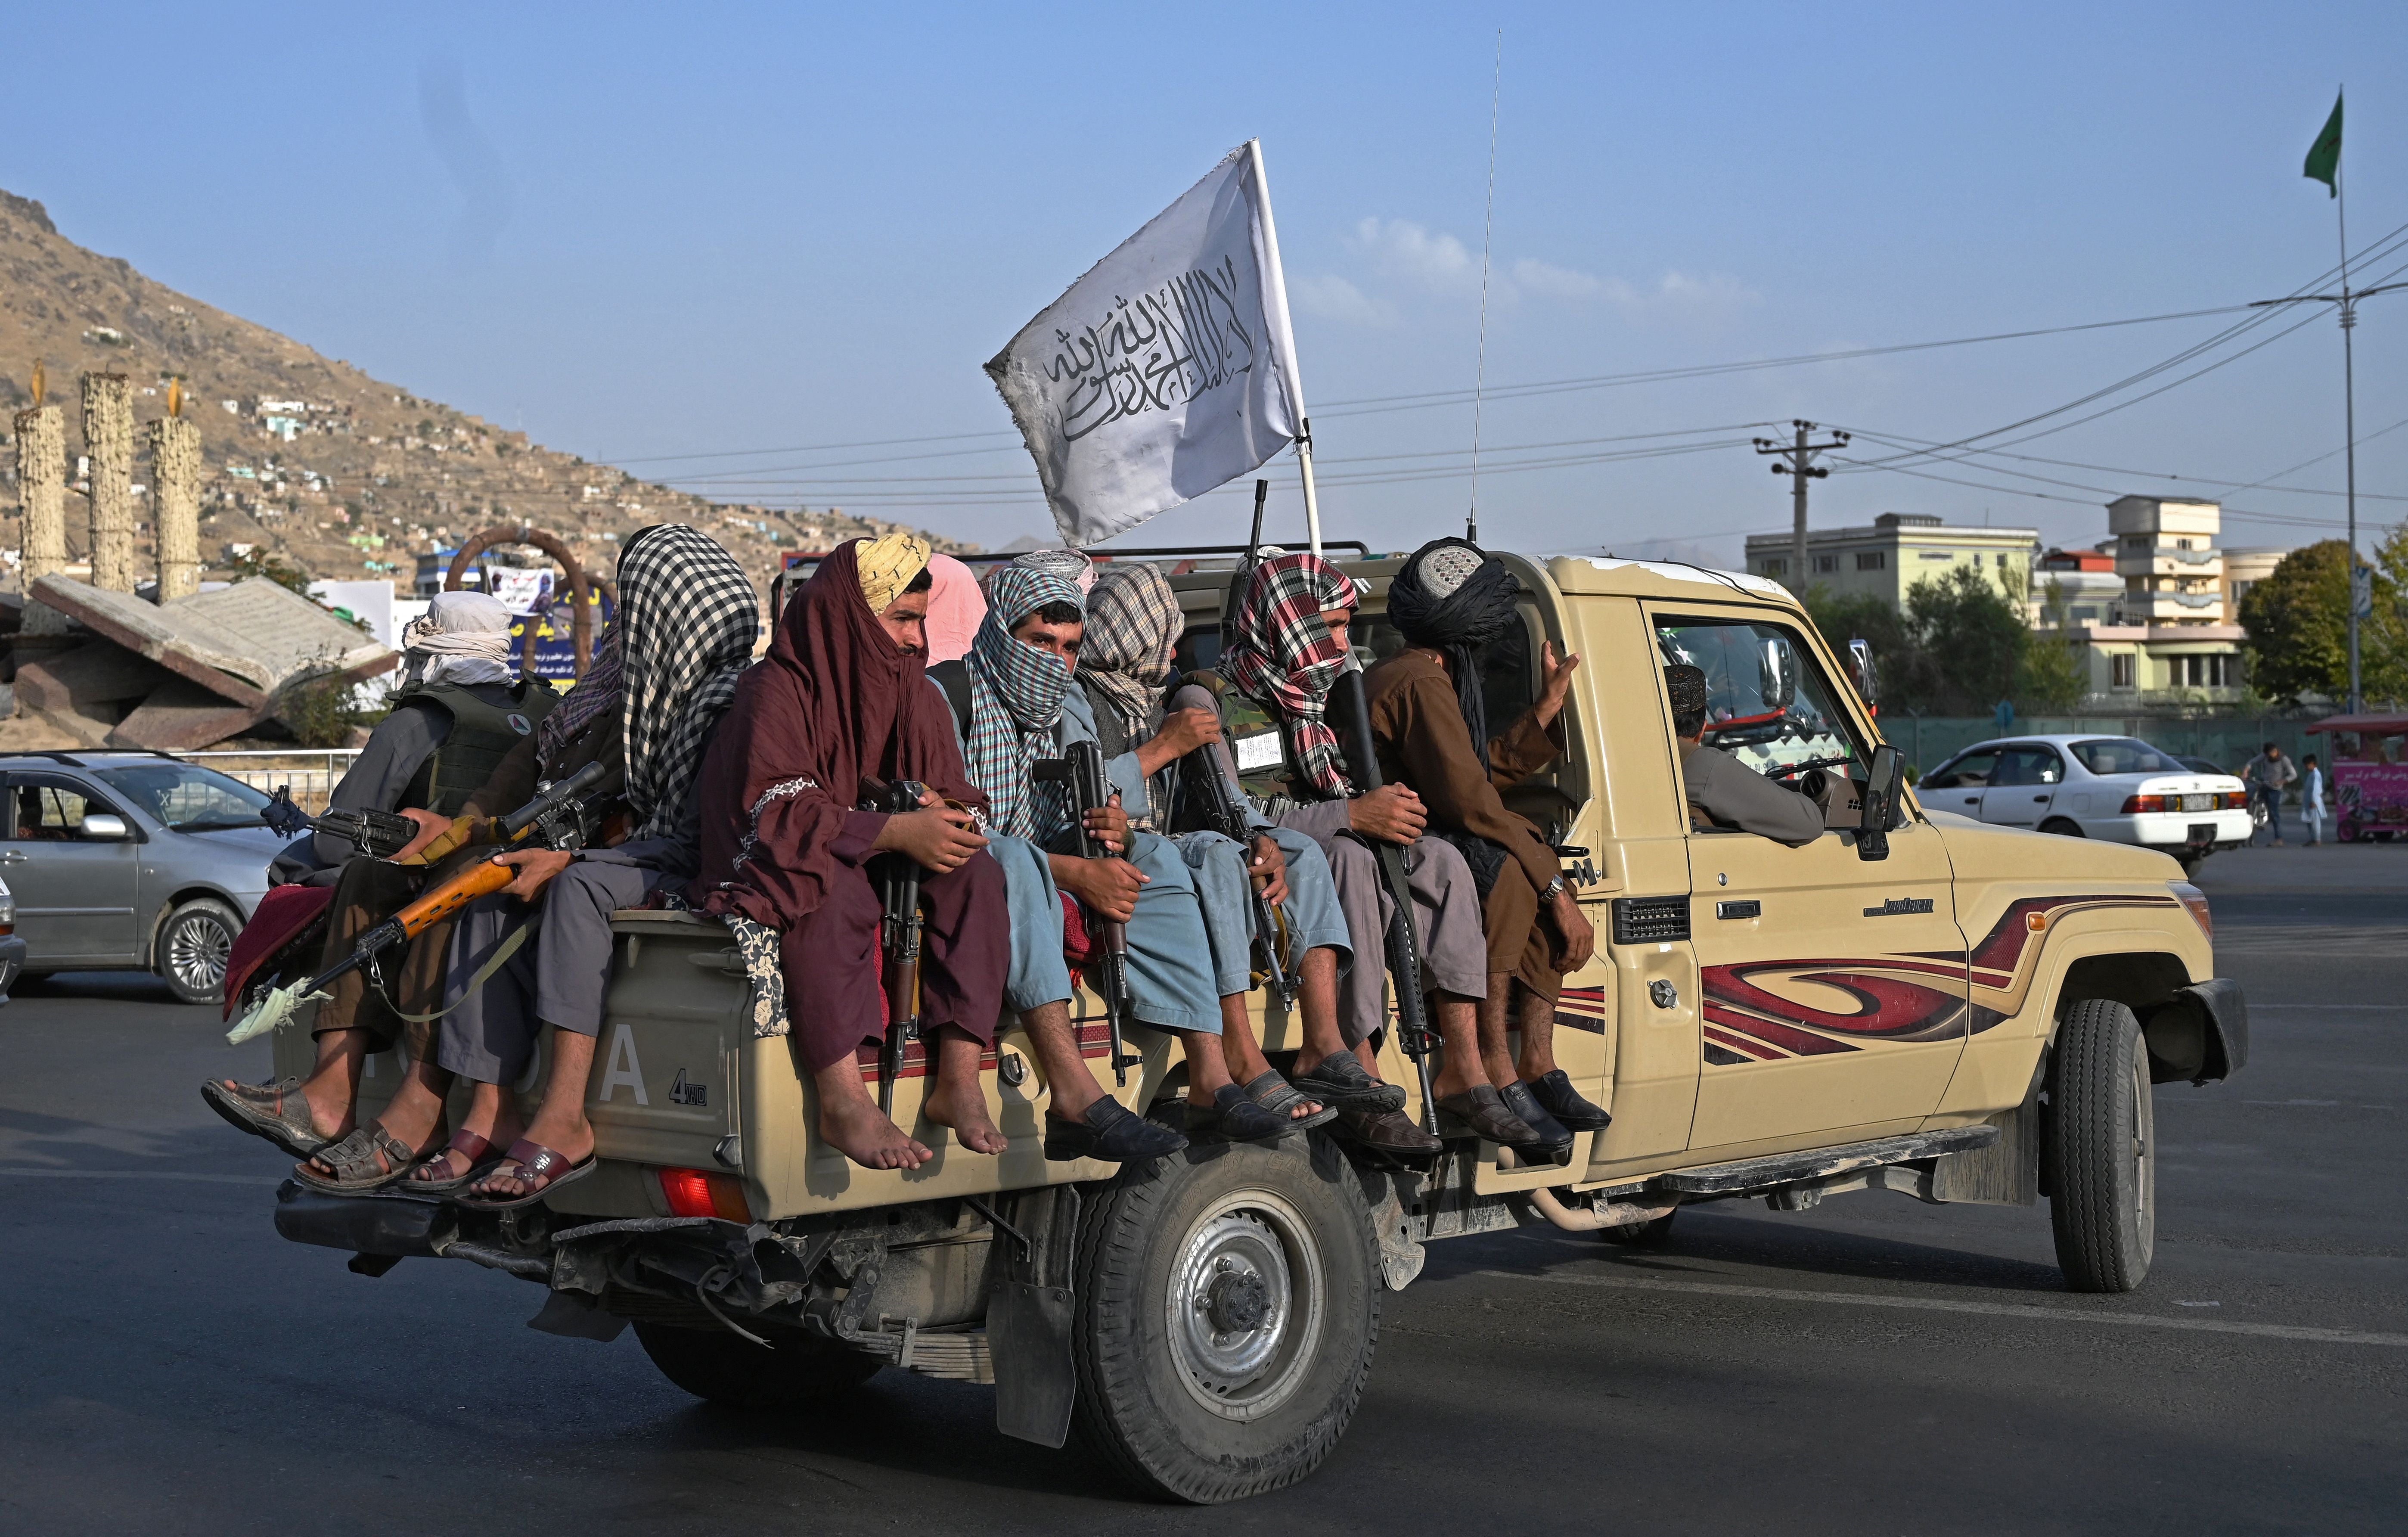 Taliban fighters patrol the streets of Kabul